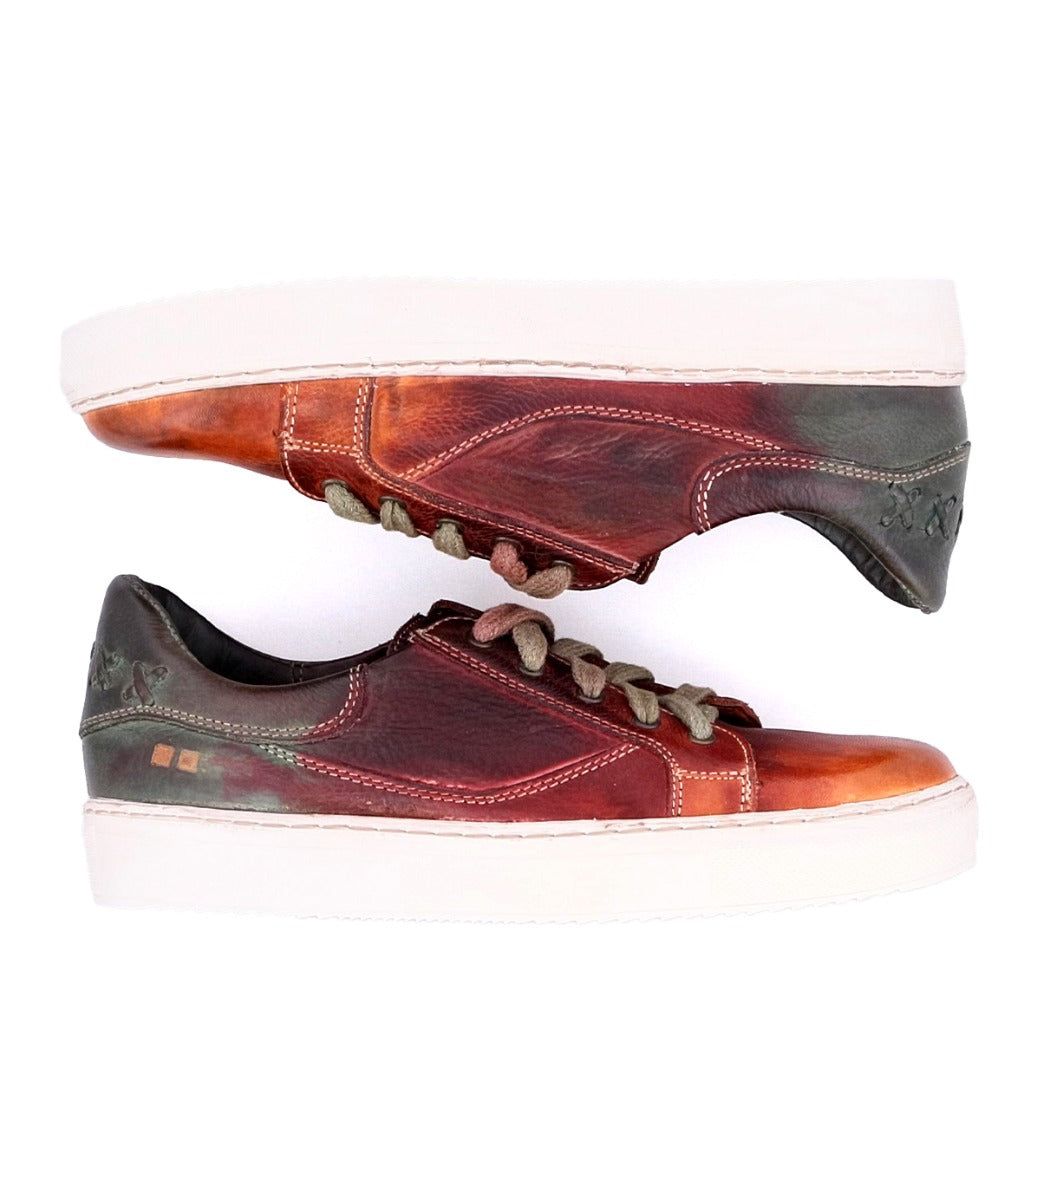 A pair of Bed Stu Azeli sneakers with a red and green color.